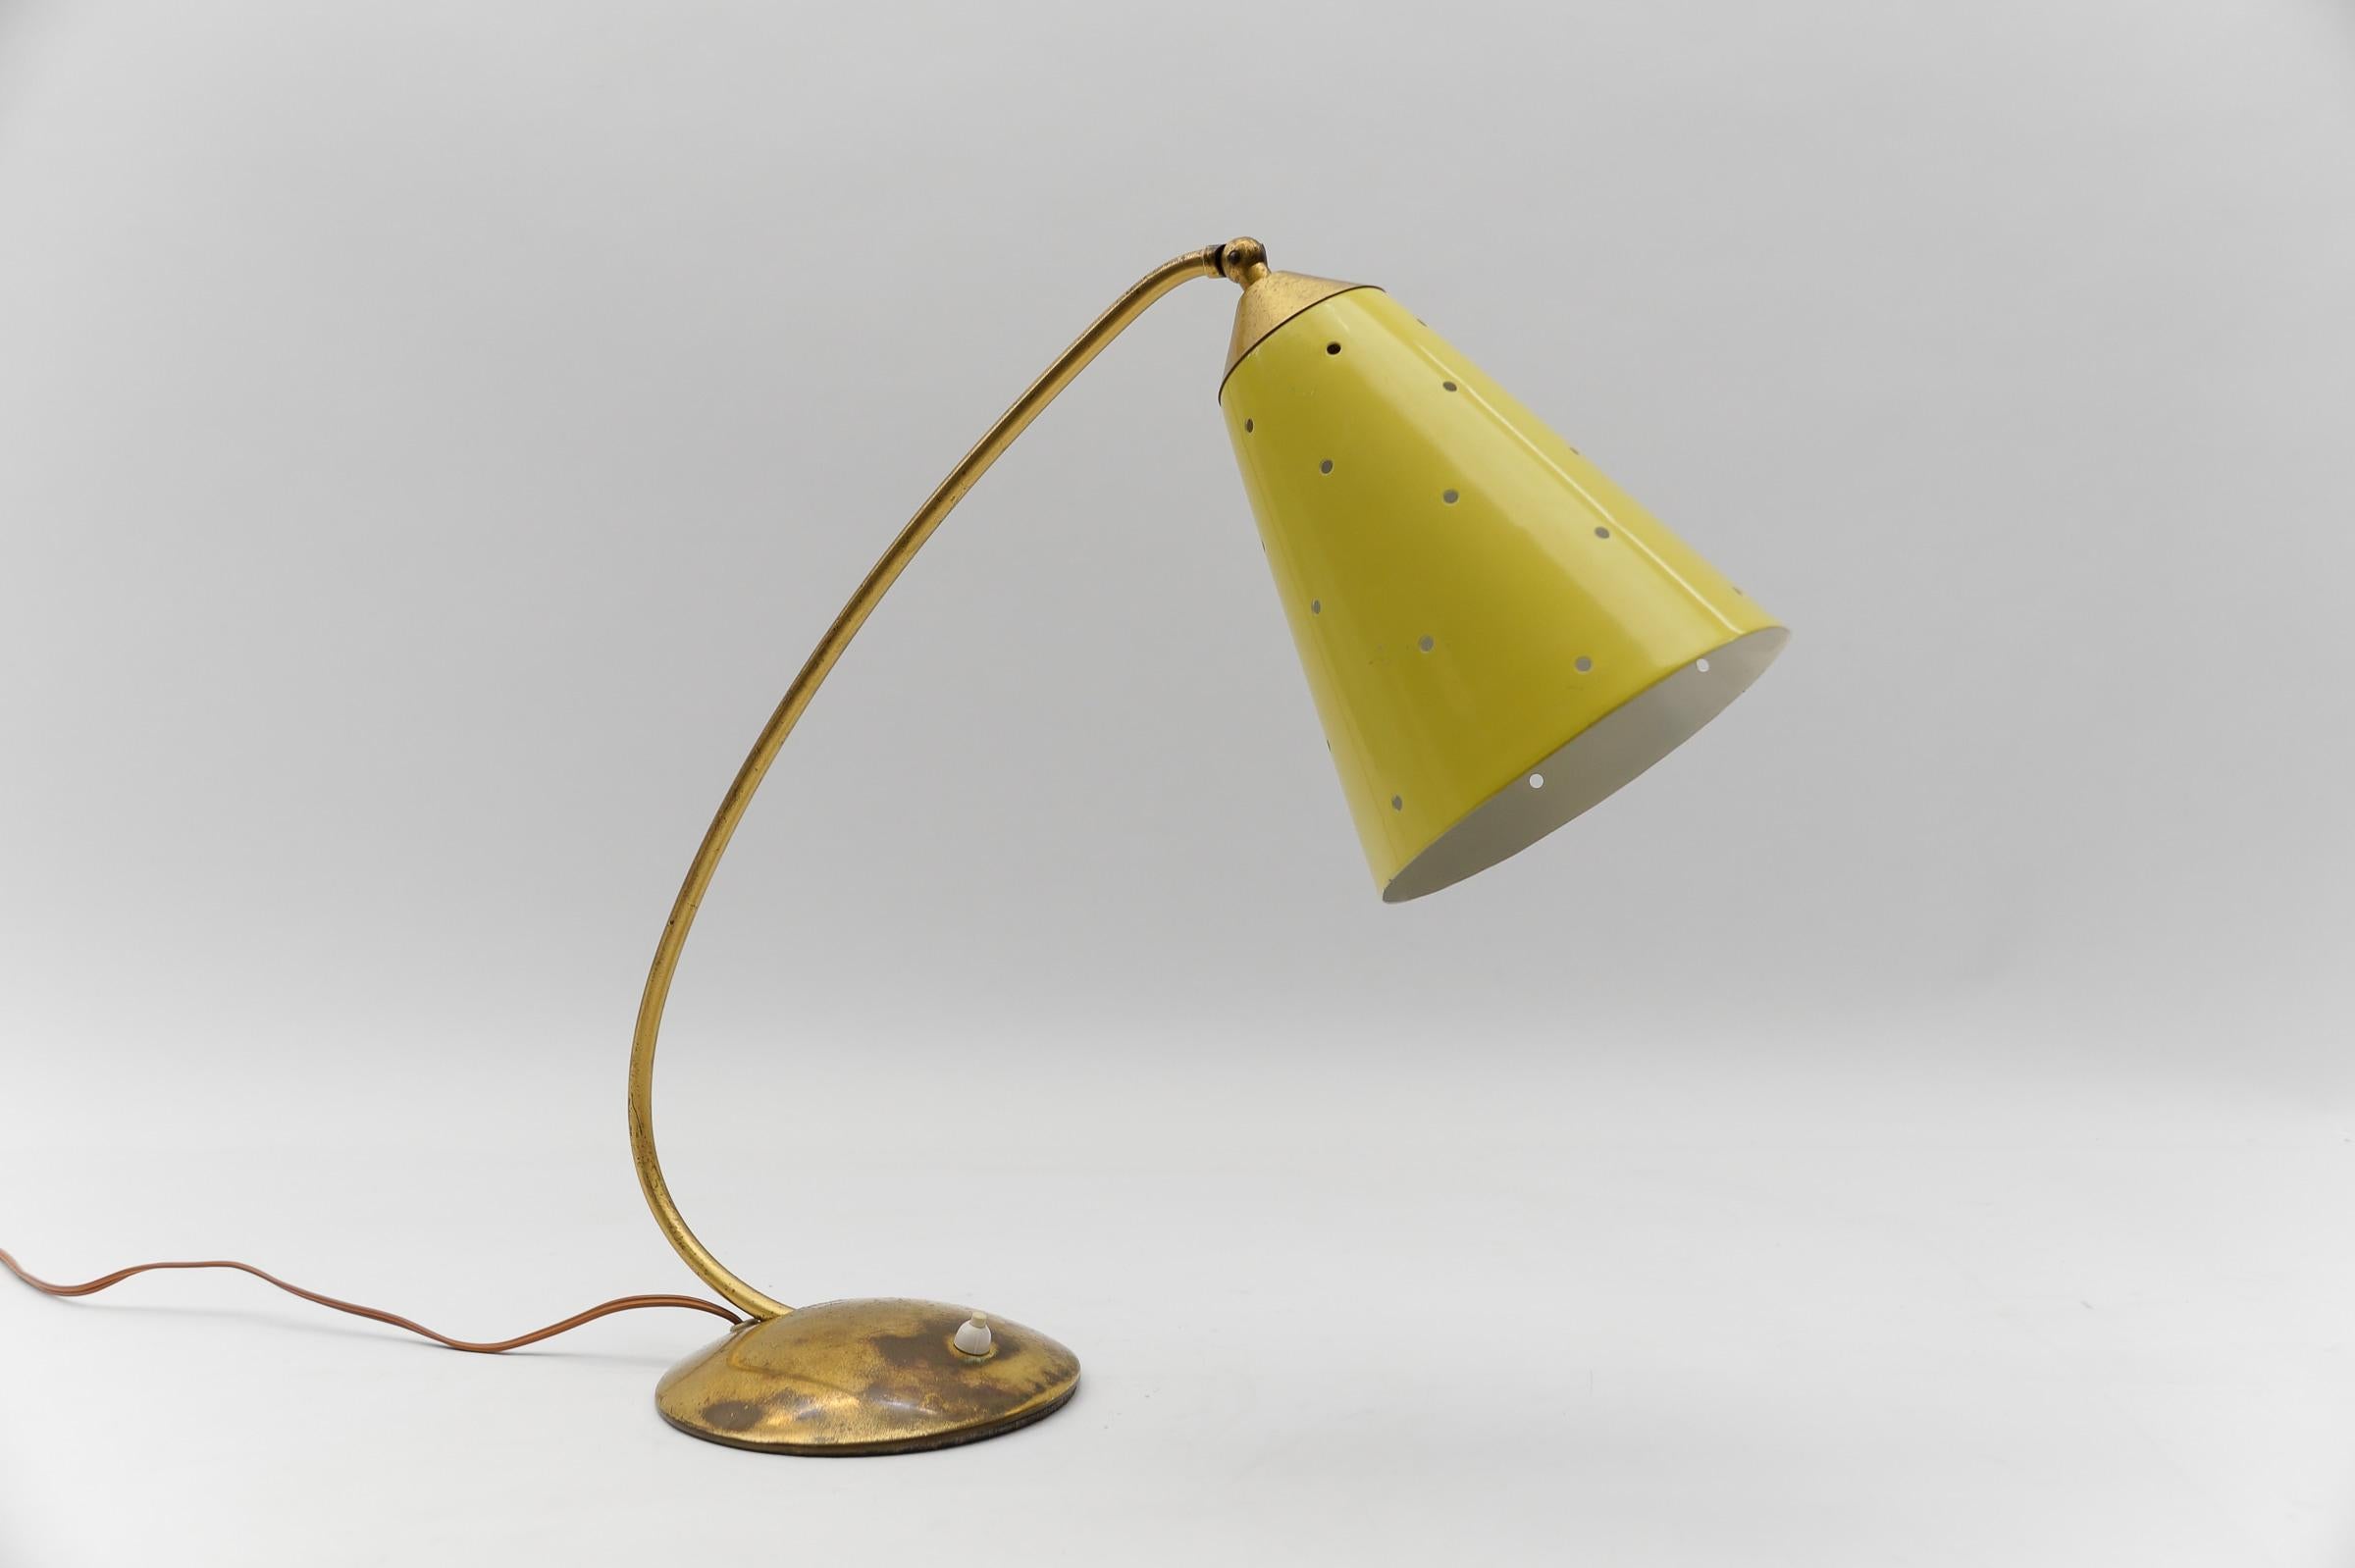 Lovely Mid-Century Modern Table Lamp in Brass, 1950s

The lamp needs 1 x E14 / E15 Edison screw fit bulb, is wired, and in working condition. It runs both on 110 / 230 volt.

Very elegant and cute at the same time.

Light bulbs are not included.

It